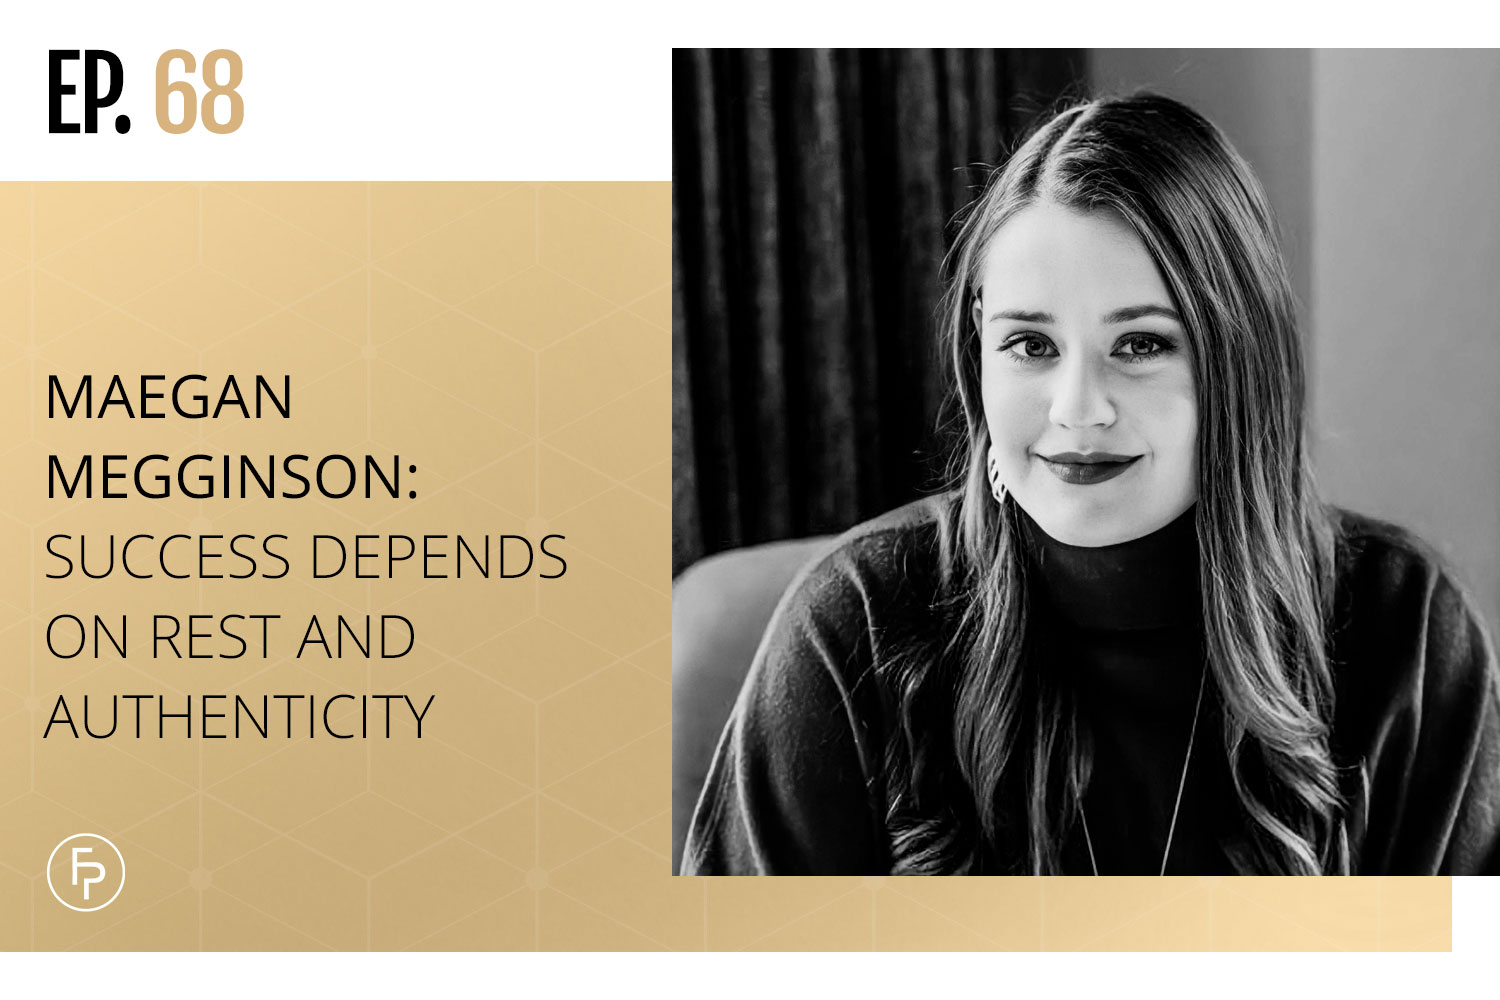 Image is a graphic for The Fearless Practice podcast and features a black and white photo of Maegan, a white woman with long dark hair and bold lipstick, atop a gold background with the words, "Ep. 68 Maegan Megginson: Success Depends On Rest And Authenticity."